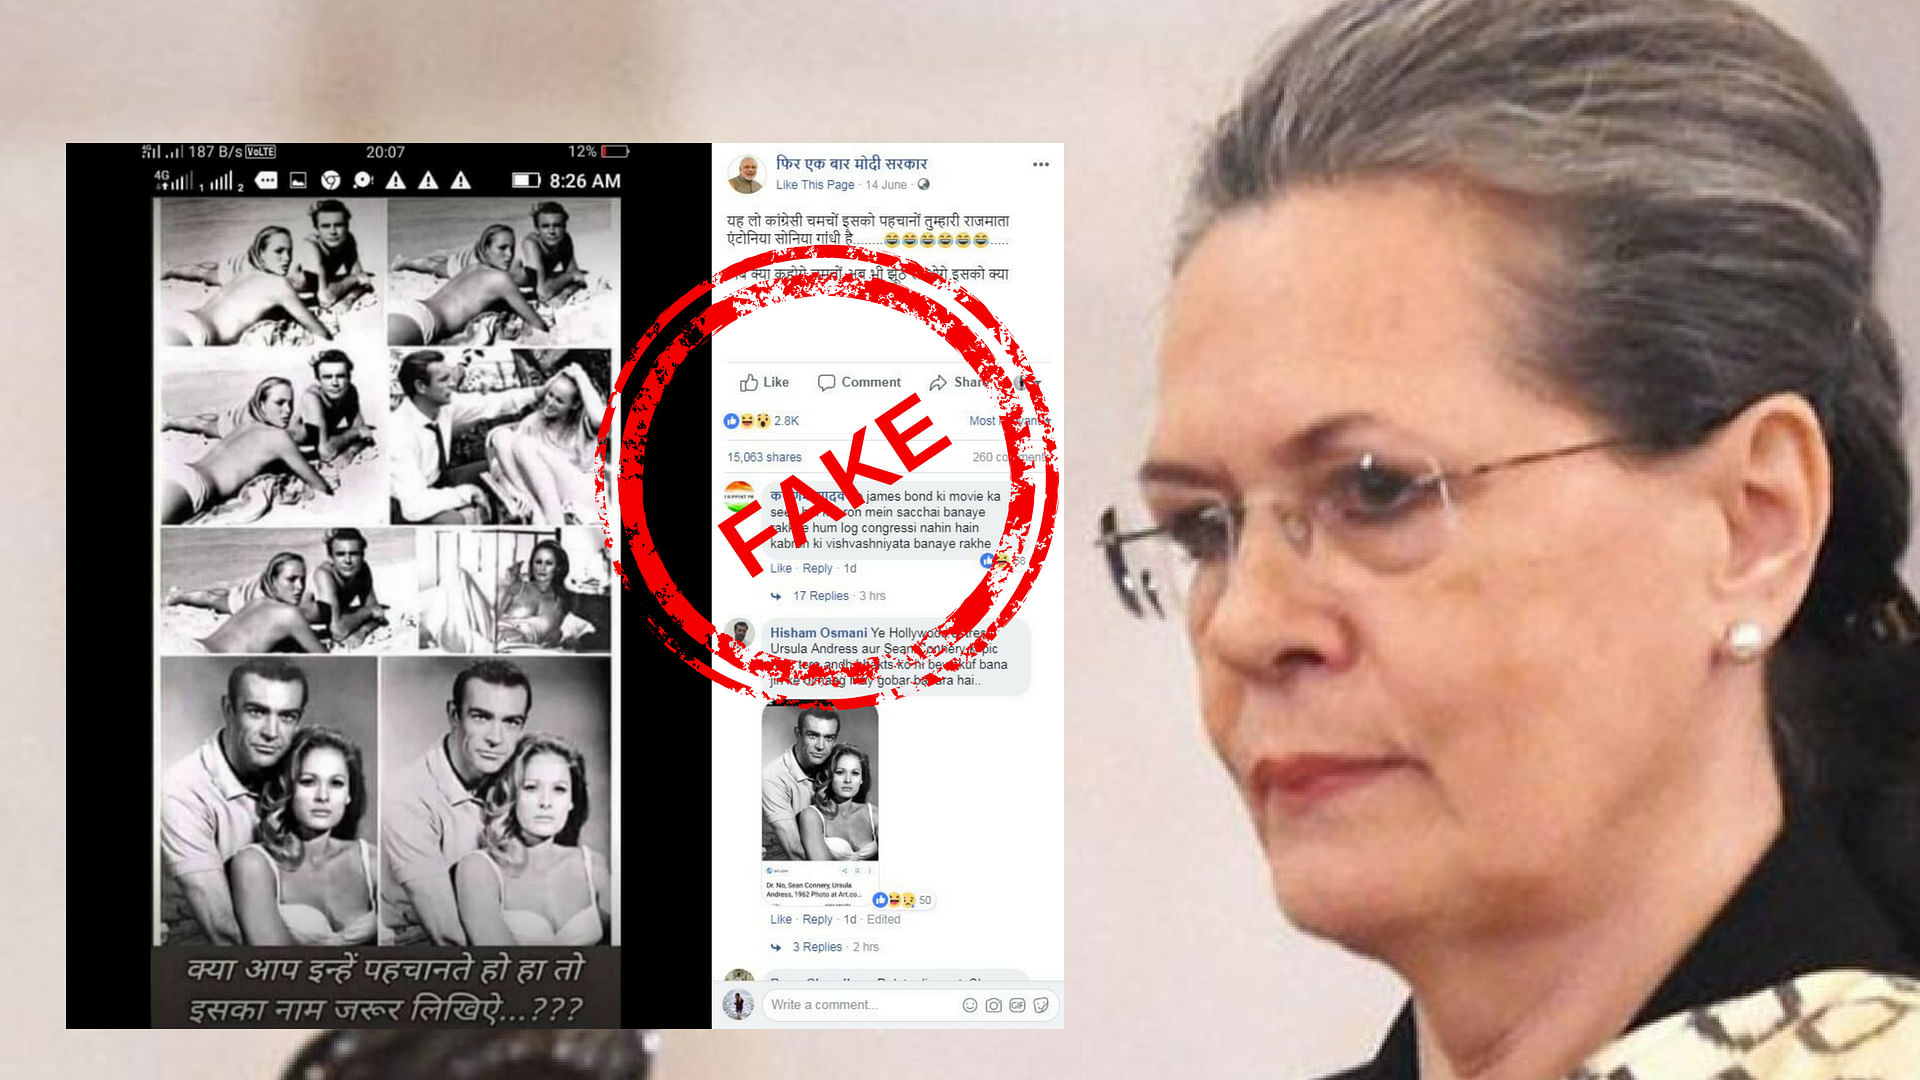 A Facebook post shows purported images of former Congress President Sonia Gandhi in beachwear. The images are actually of the James Bond actress Ursula Andress.